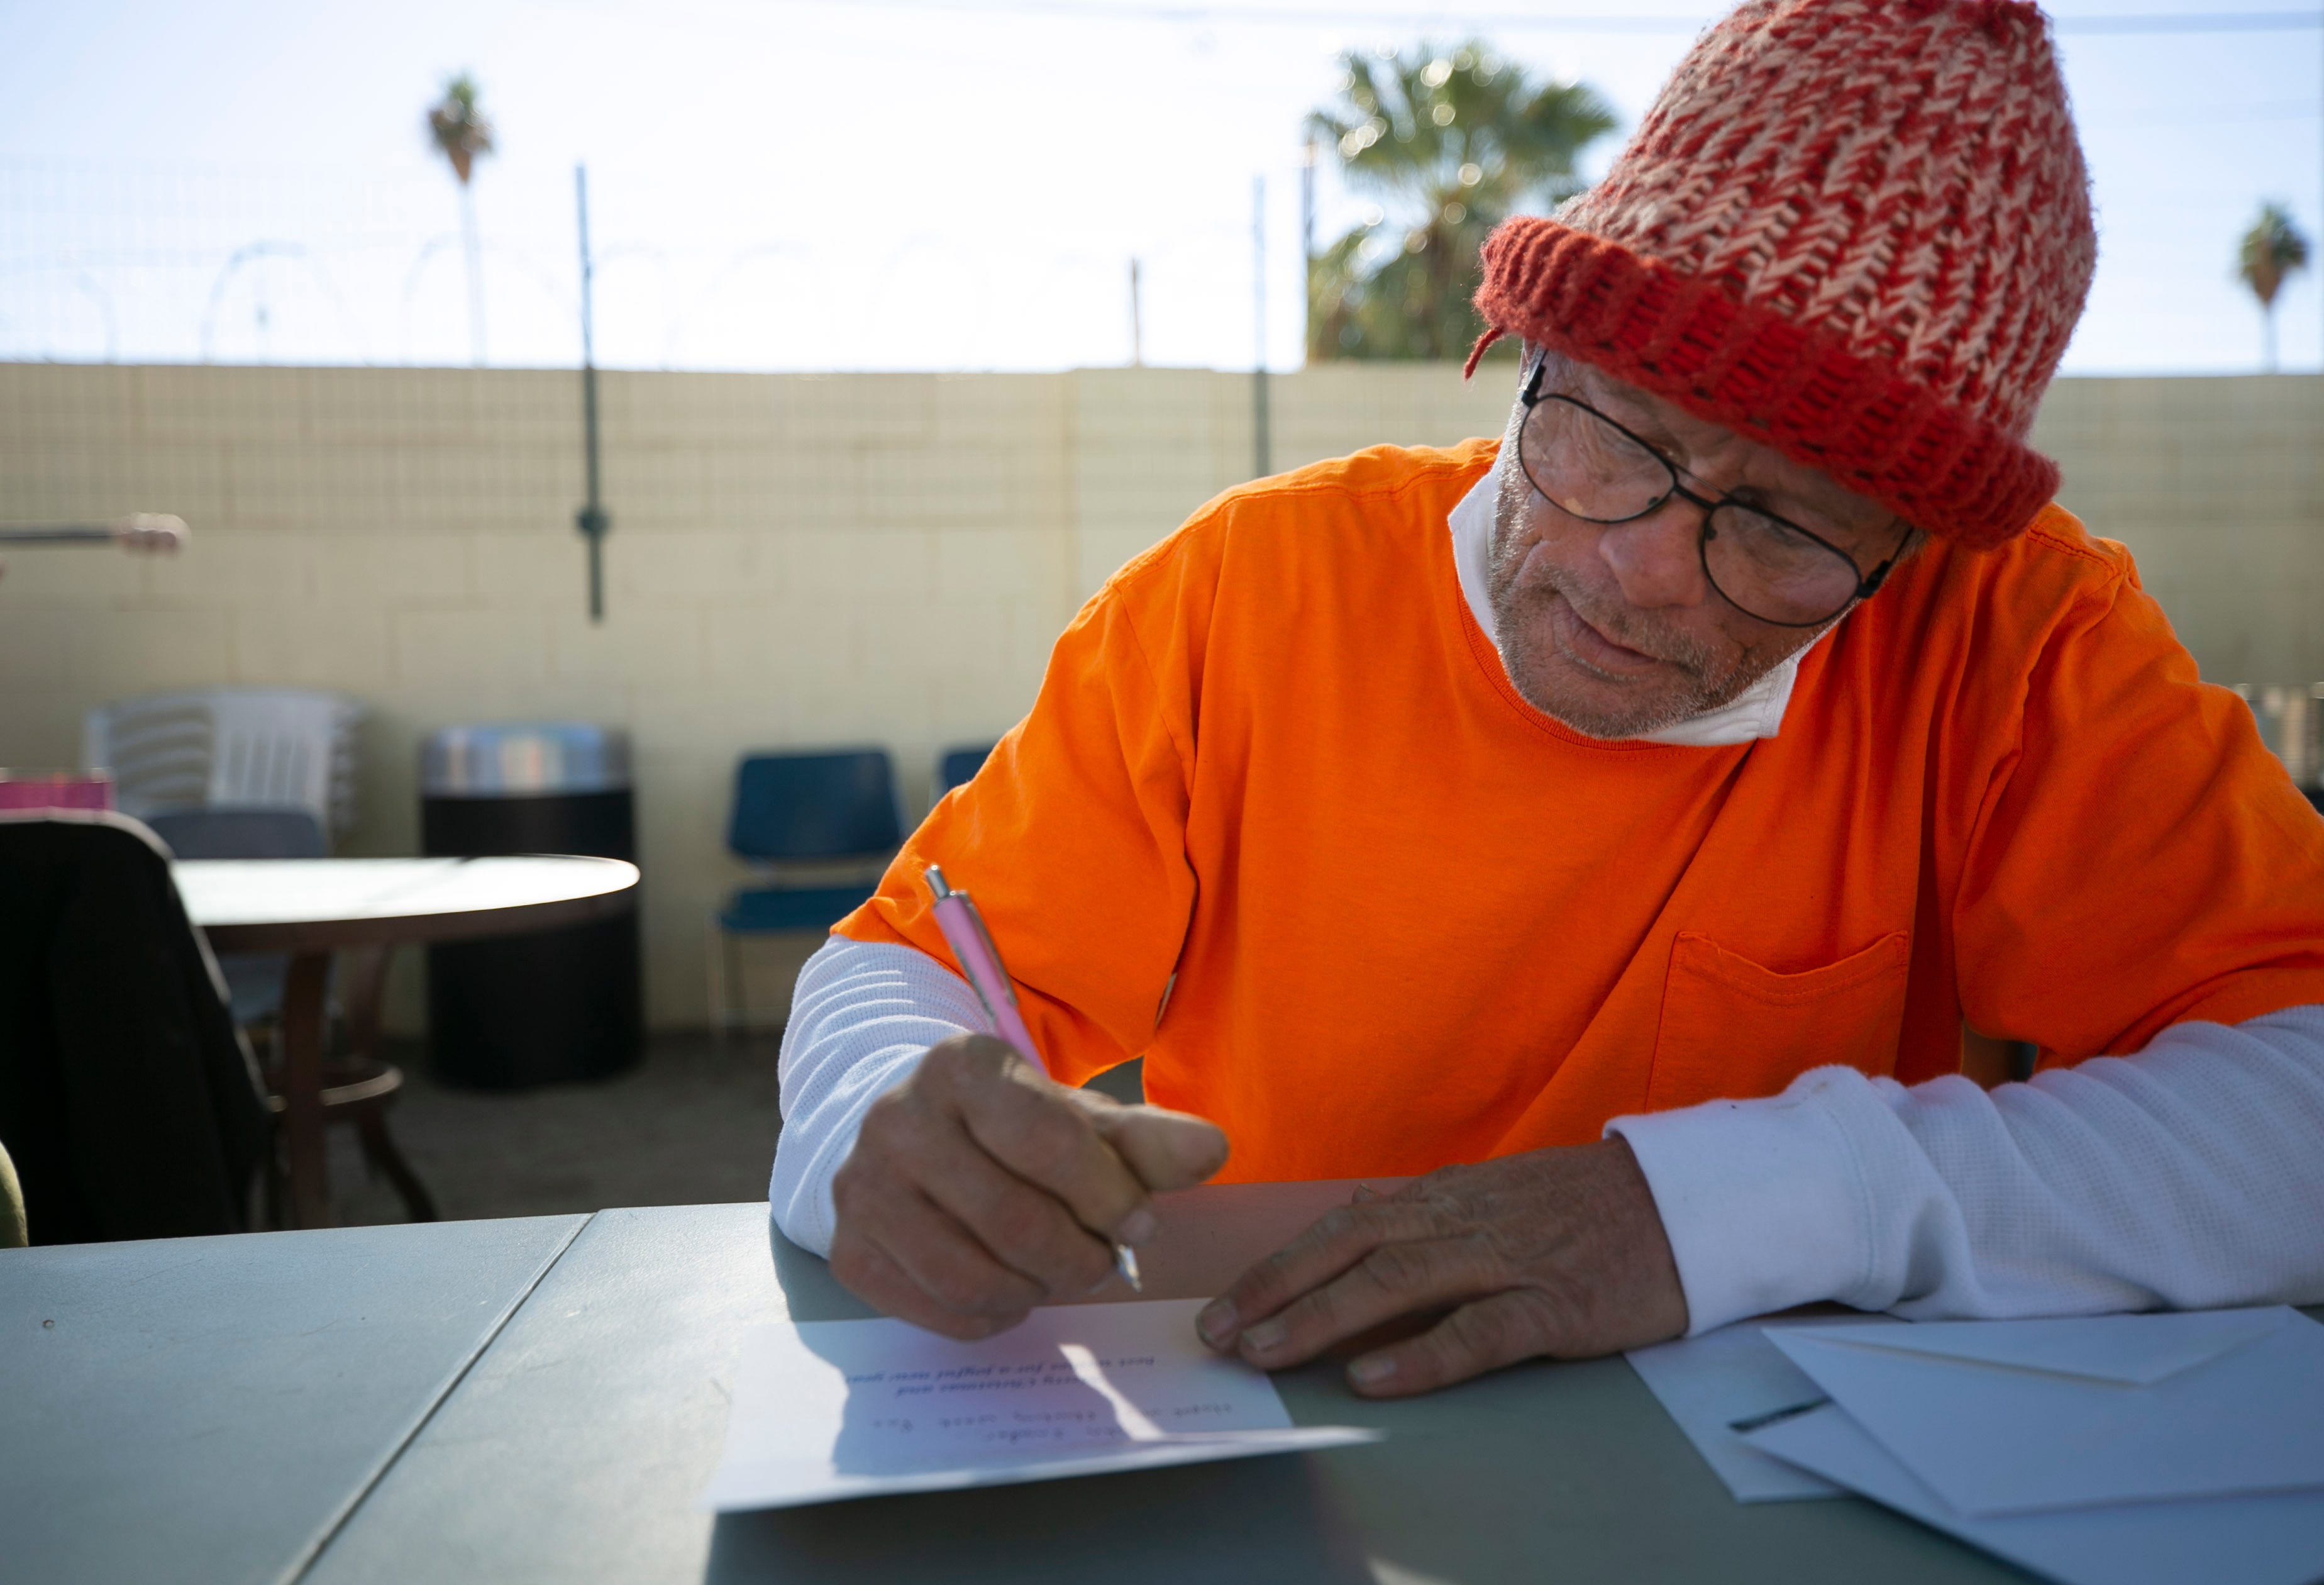 John Snyder, 59, writes holiday cards at the Justa Center in Phoenix on Dec. 9, 2020.